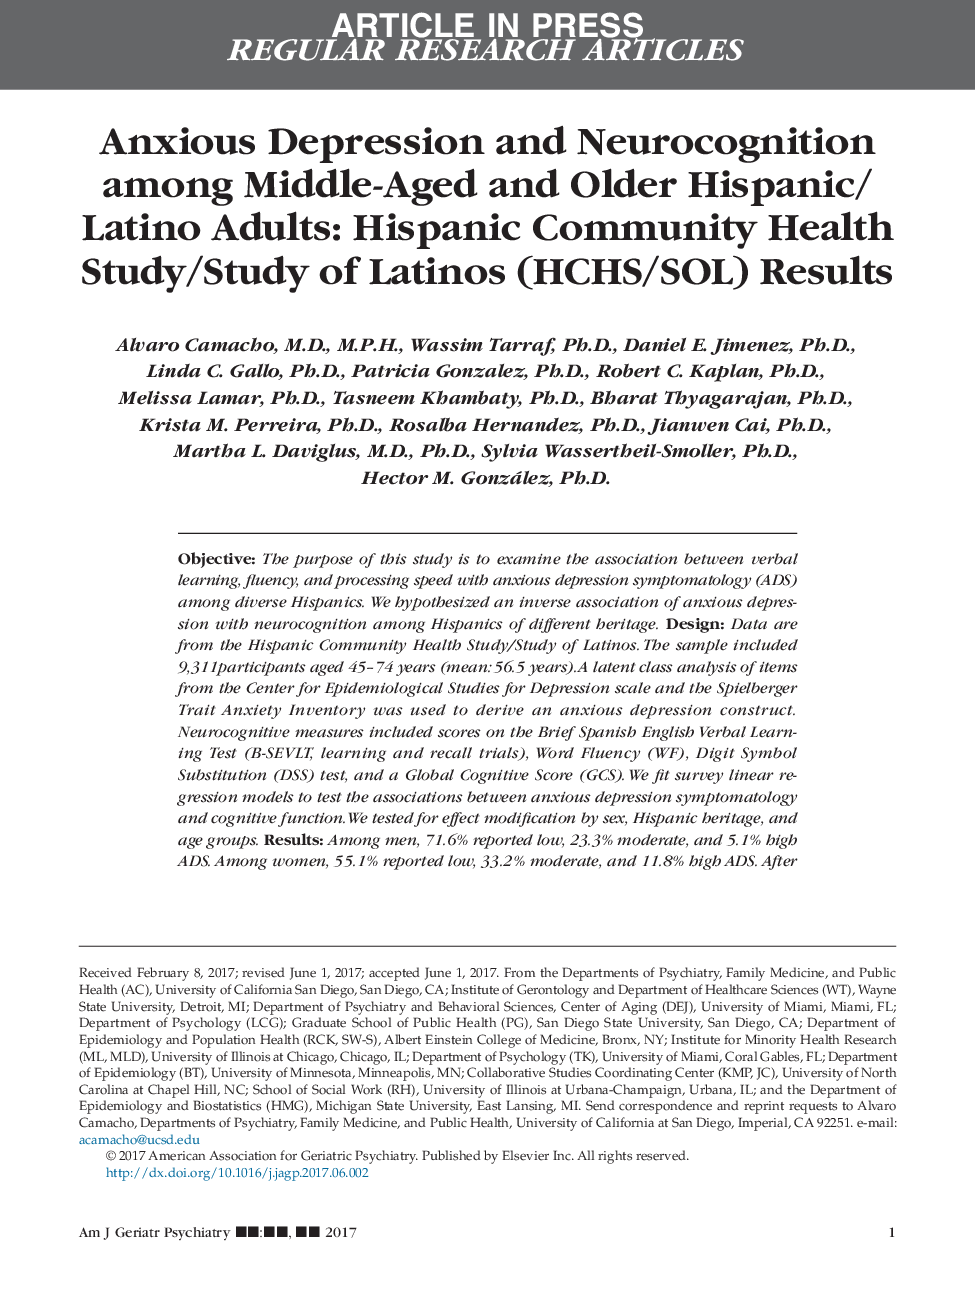 Anxious Depression and Neurocognition among Middle-Aged and Older Hispanic/Latino Adults: Hispanic Community Health Study/Study of Latinos (HCHS/SOL) Results